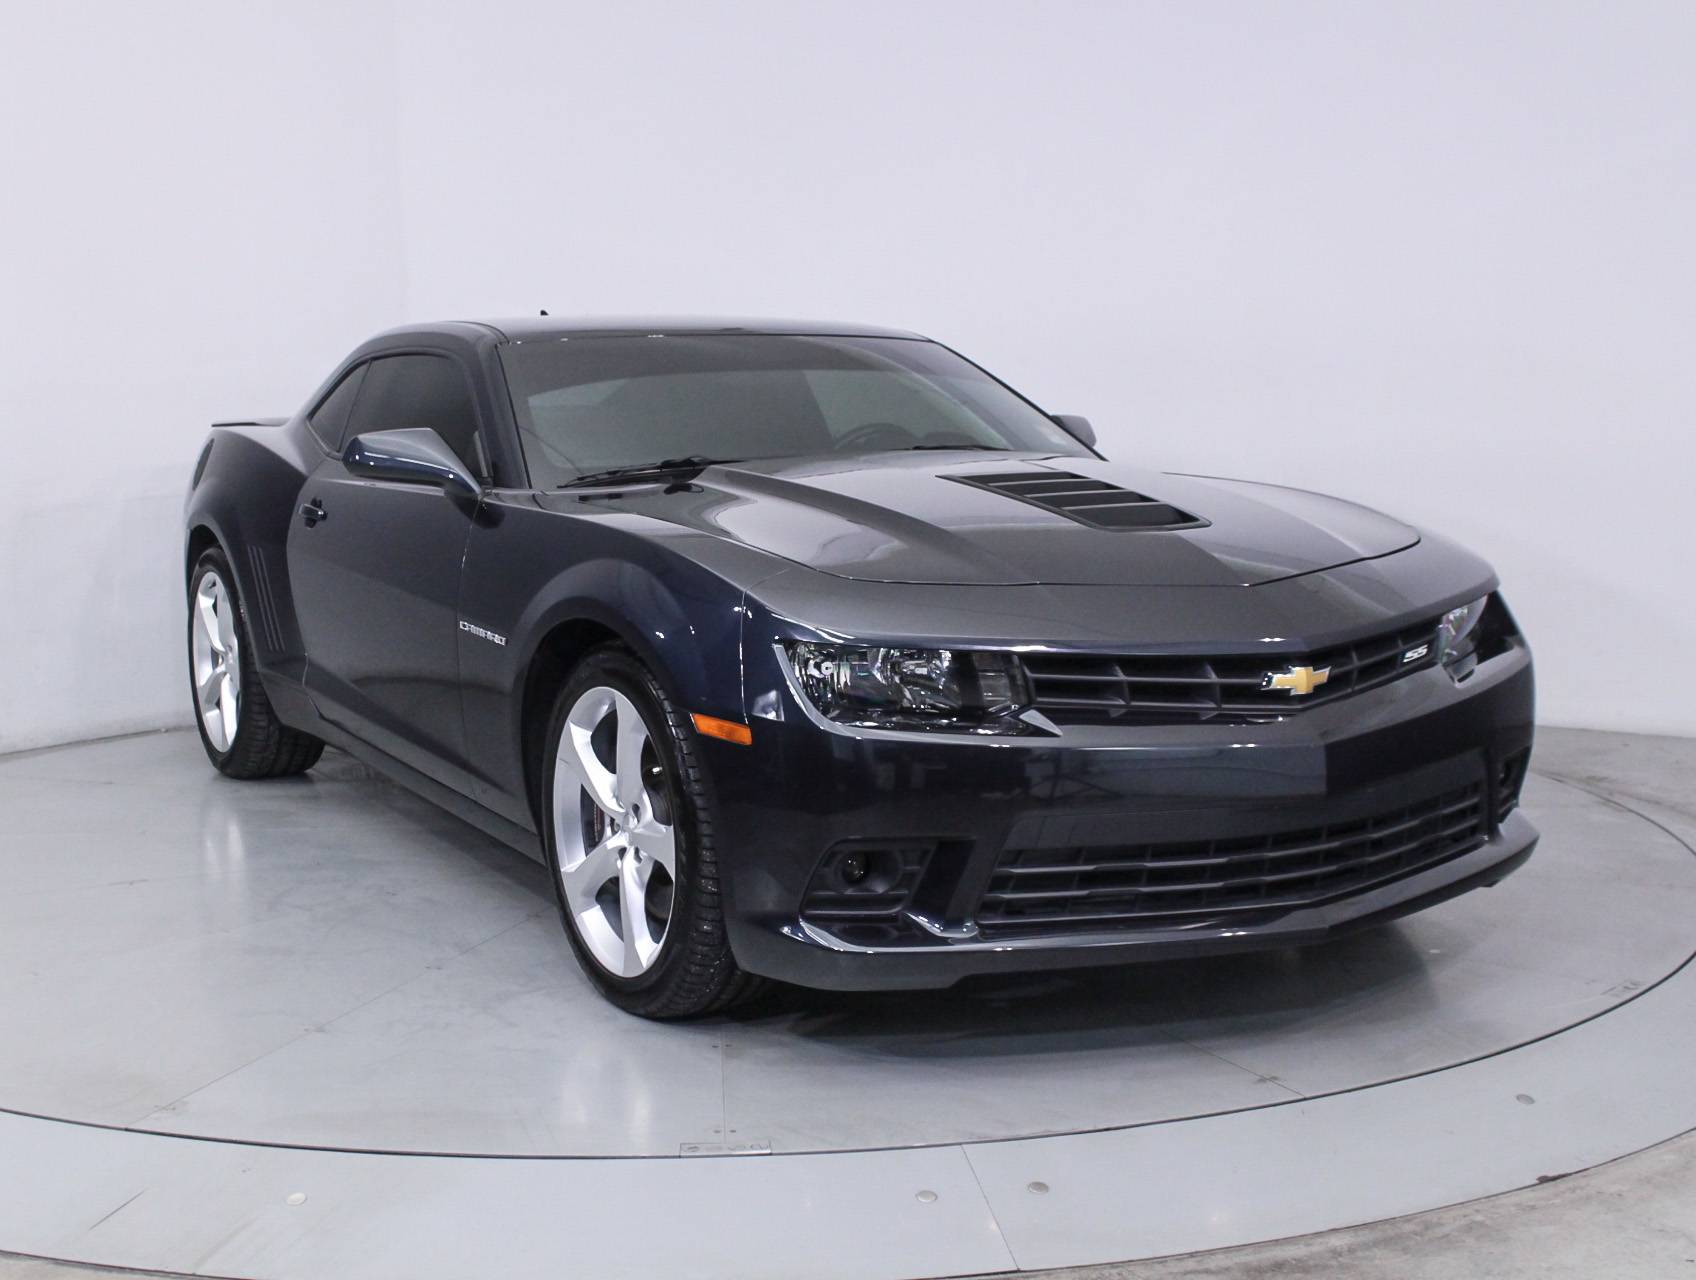 Florida Fine Cars - Used CHEVROLET CAMARO 2014 WEST PALM 1SS